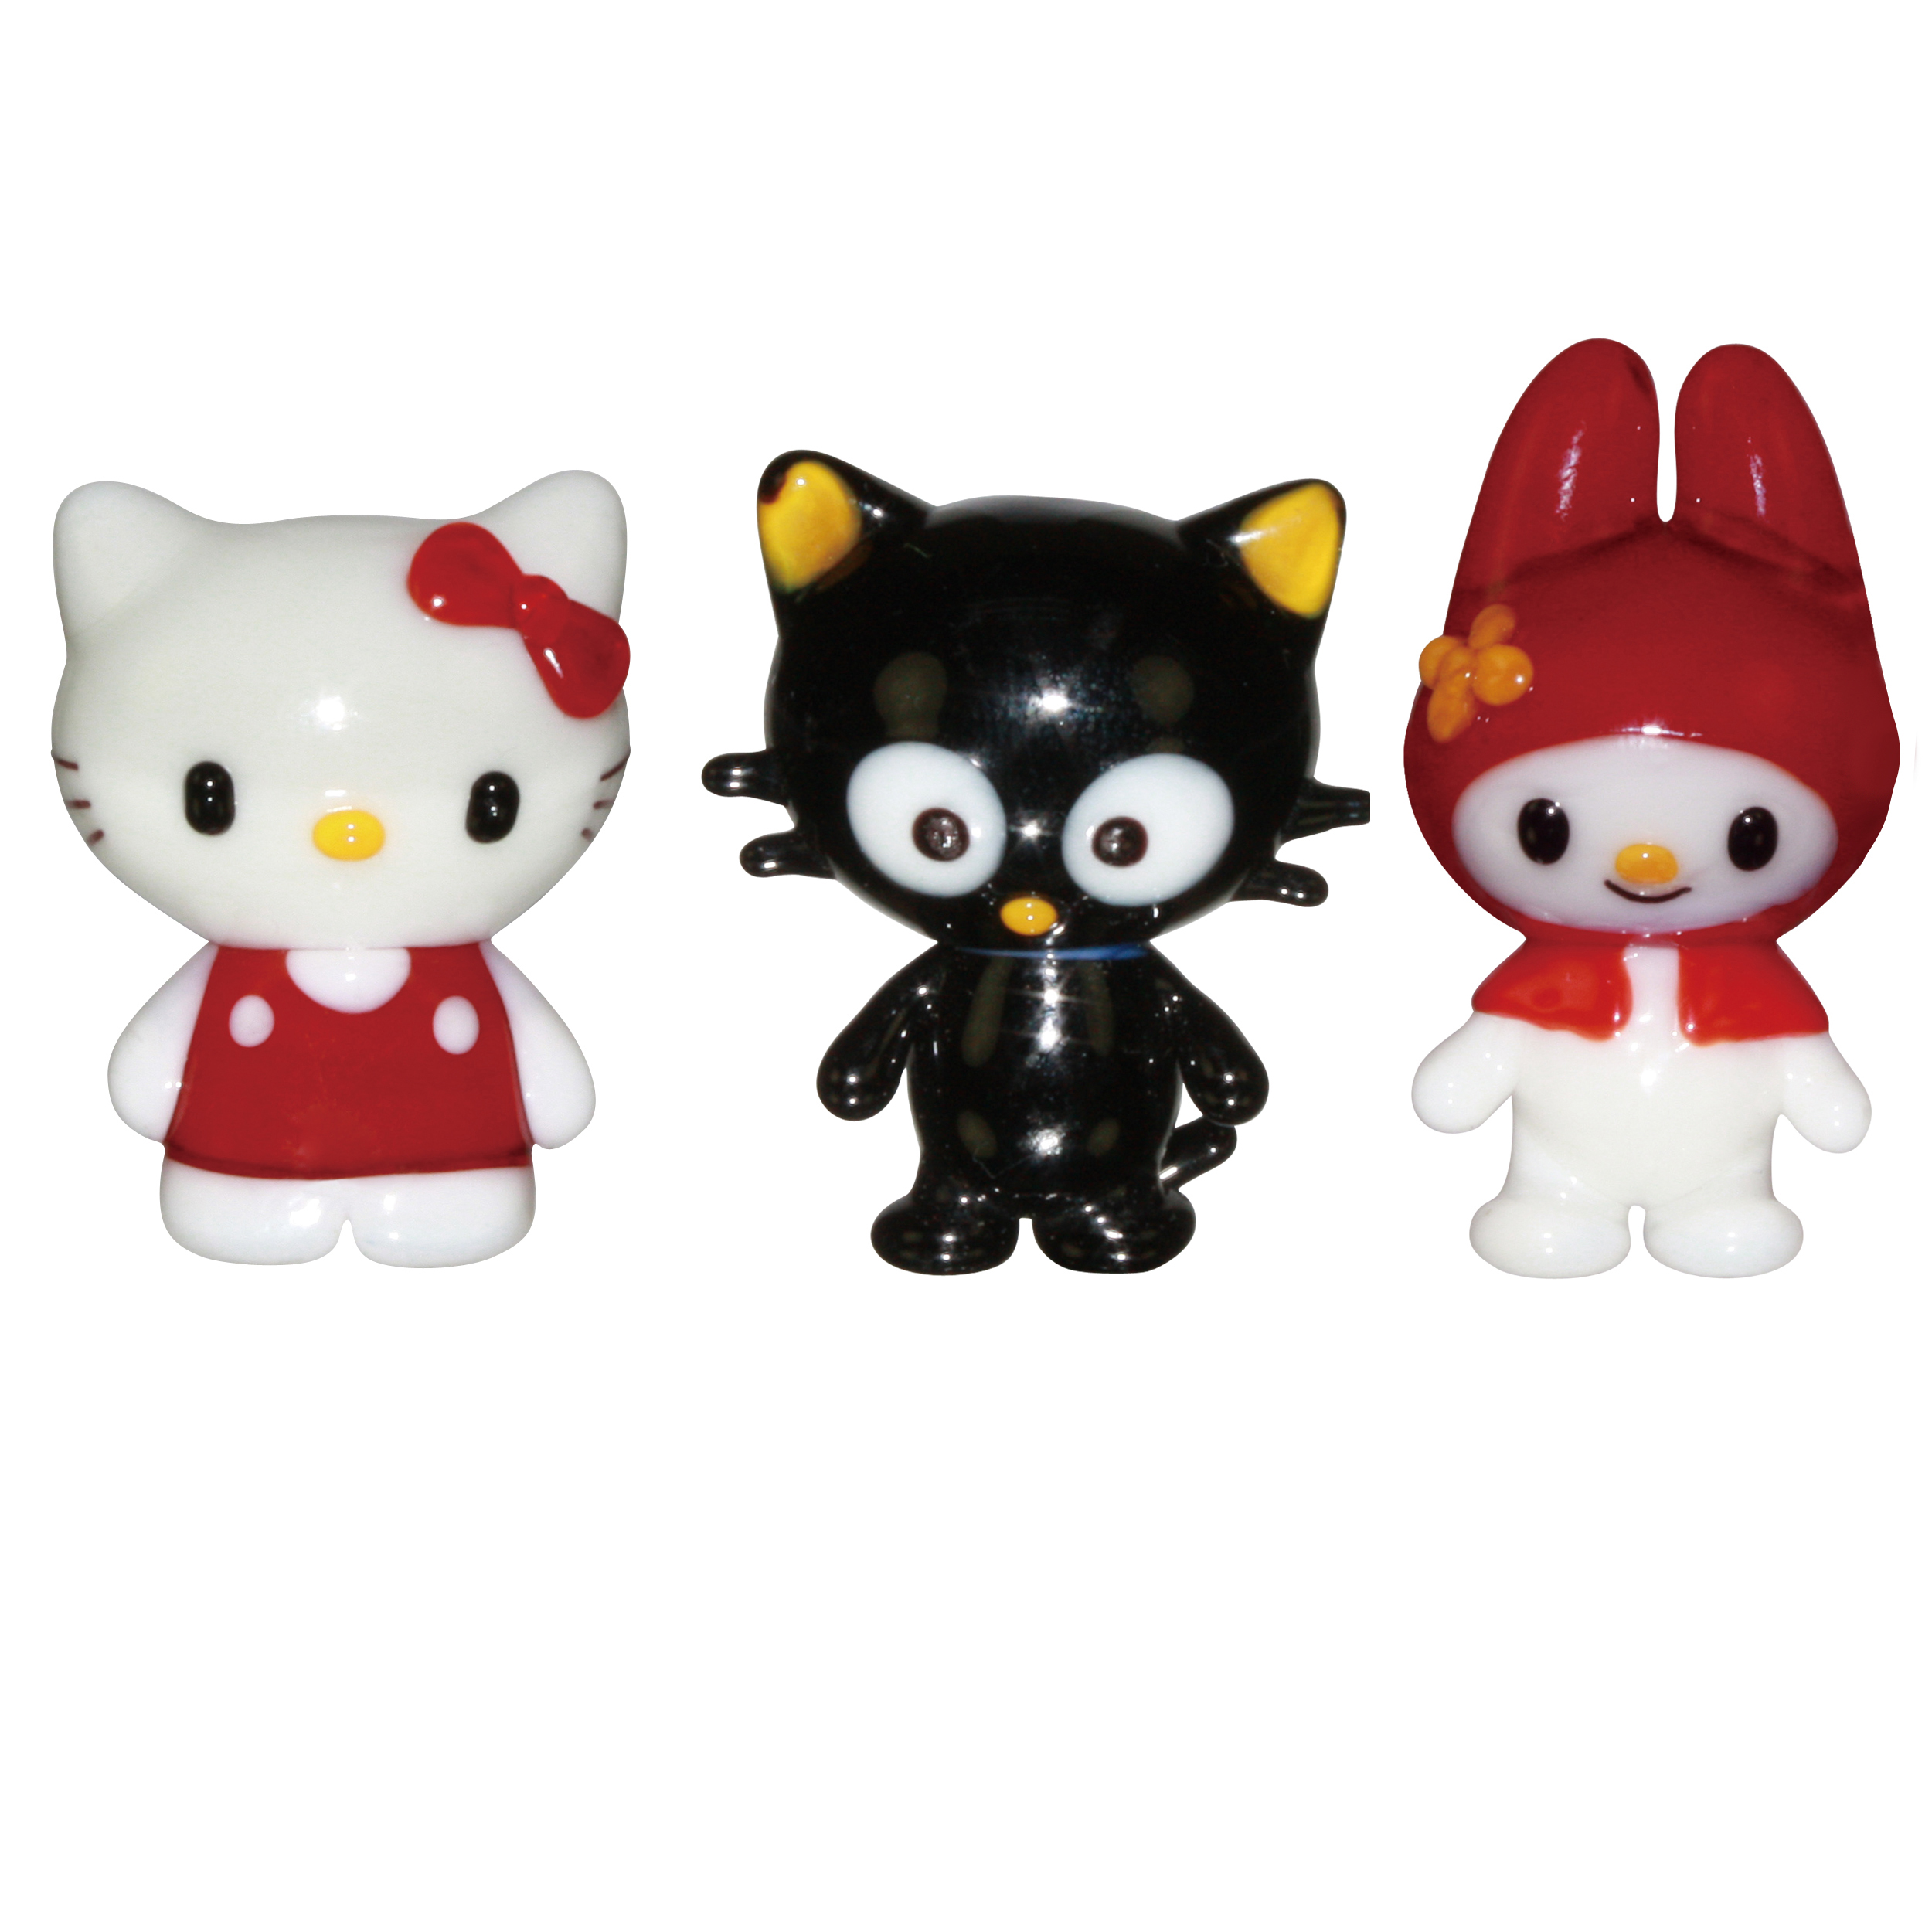 Brainstorm Products Hello Kitty Glass figurines